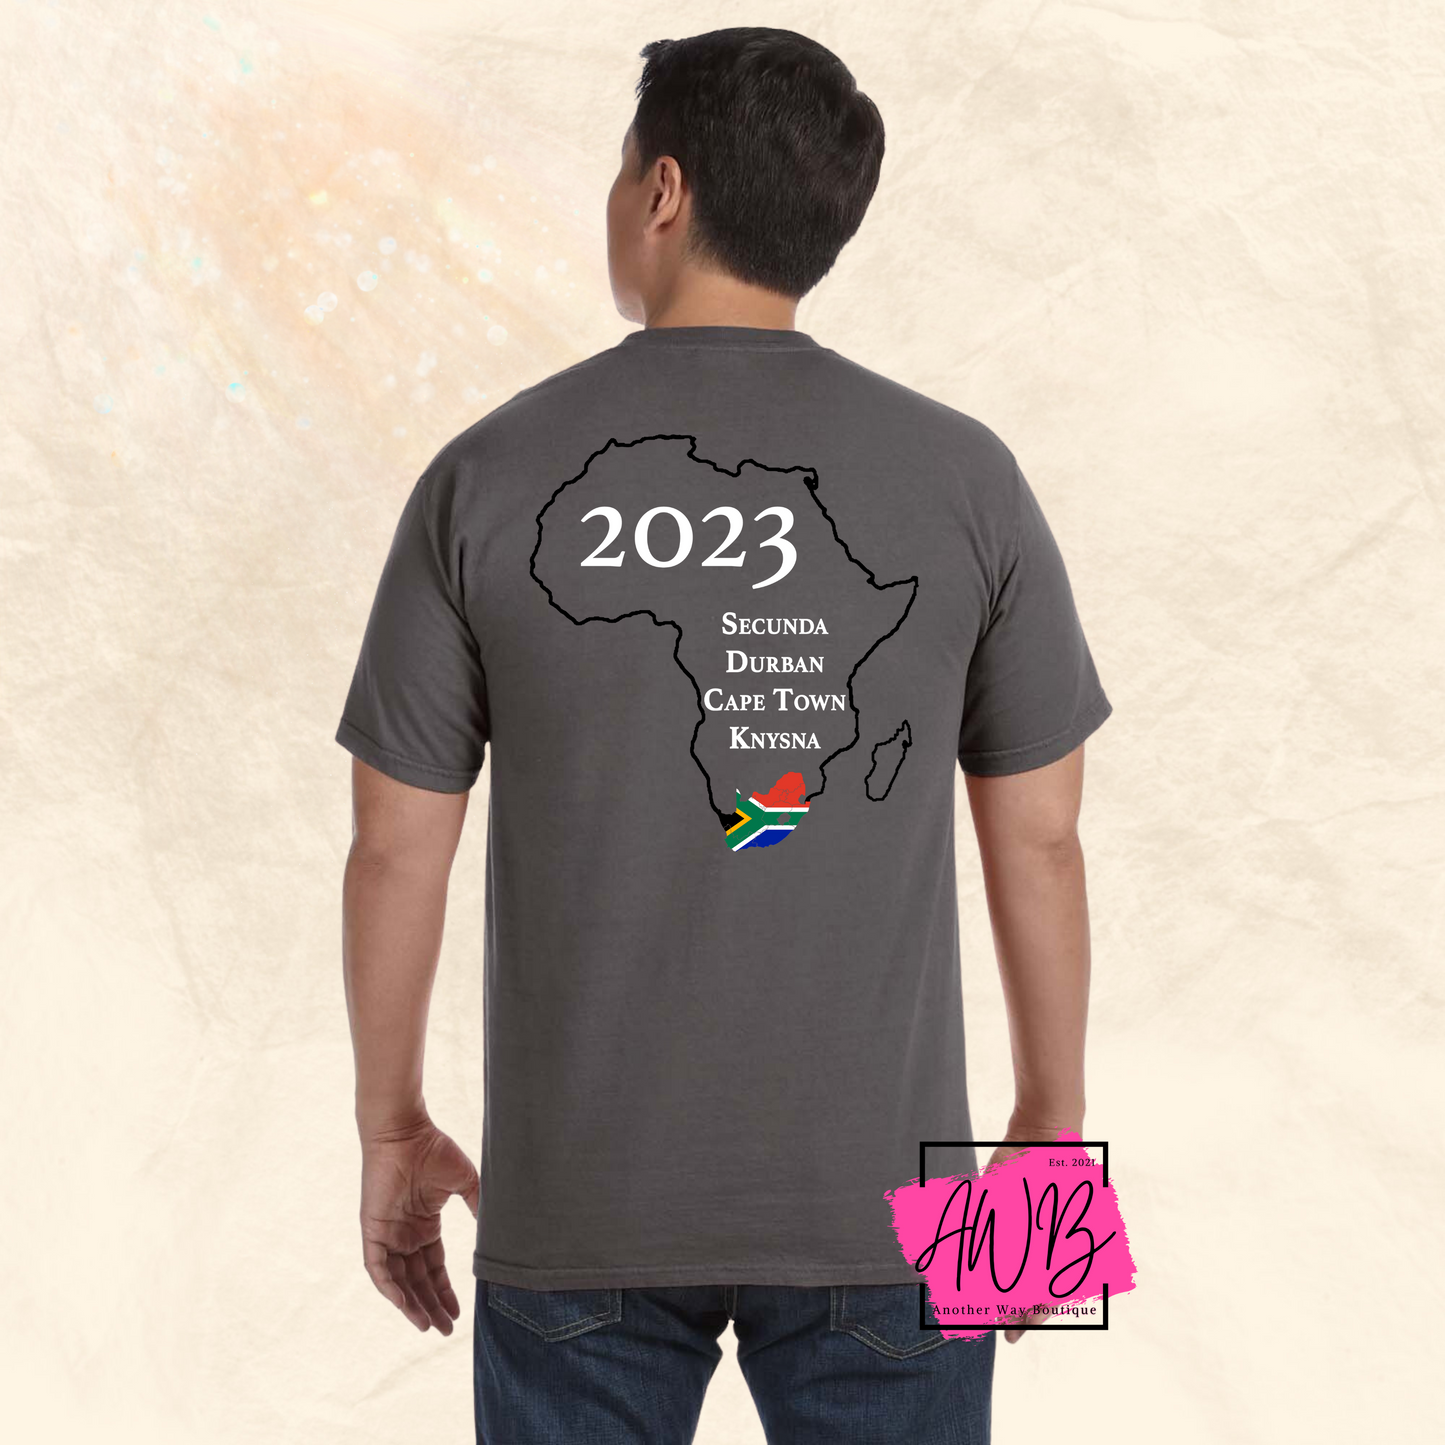 2023 South Africa Tee